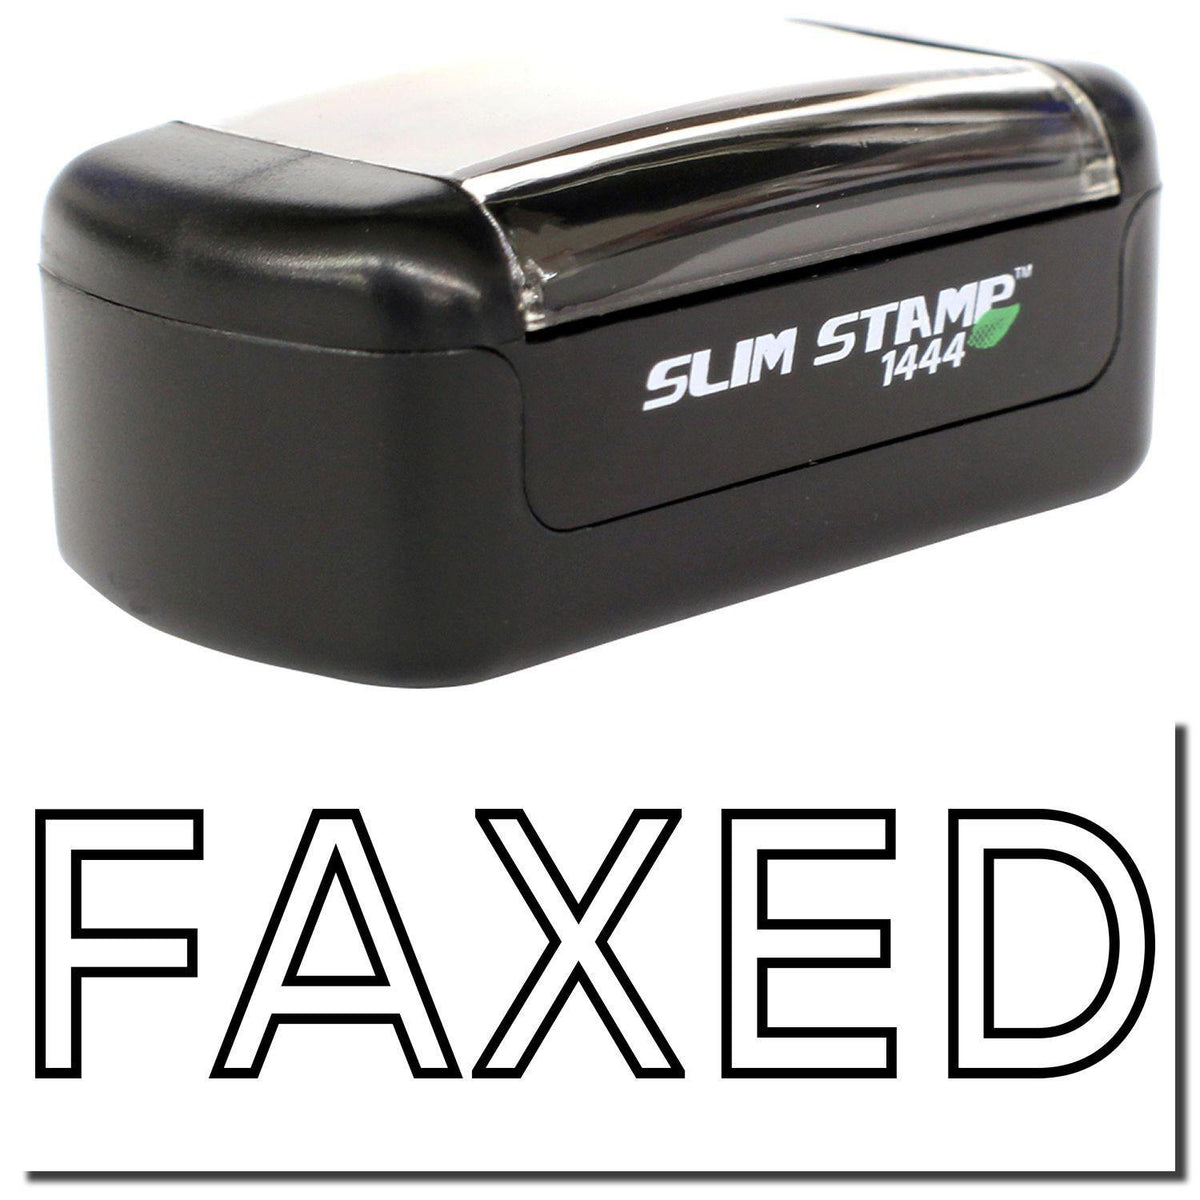 A stock office pre-inked stamp with a stamped image showing how the text &quot;FAXED&quot; in an outline font is displayed after stamping.